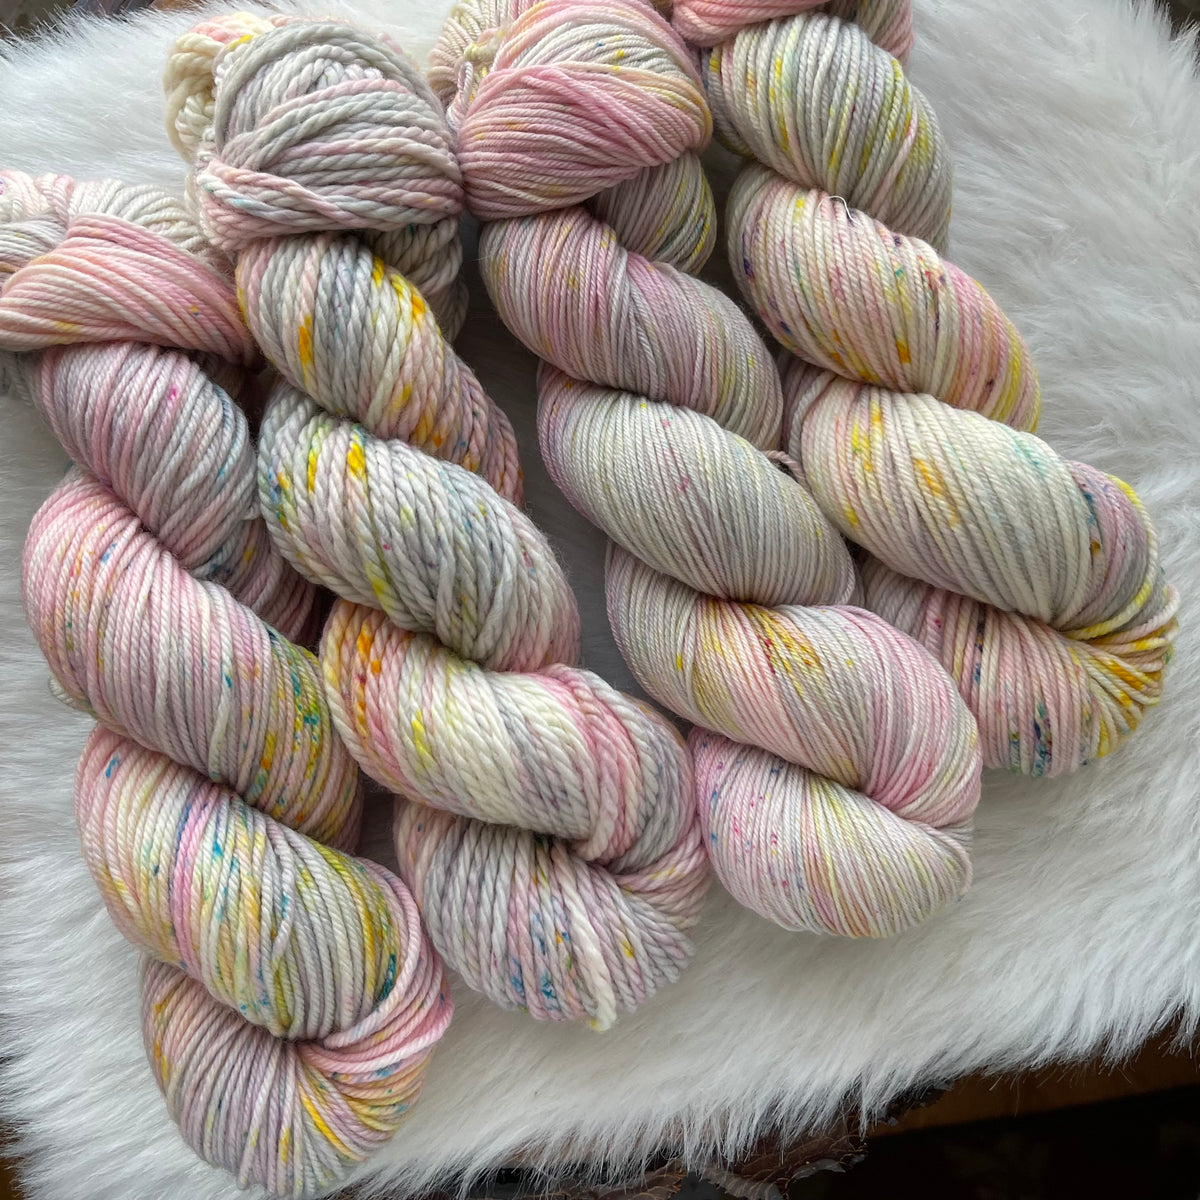 NEW BEGINNING  - Dyed to Order - Hand Dyed Yarn Skein